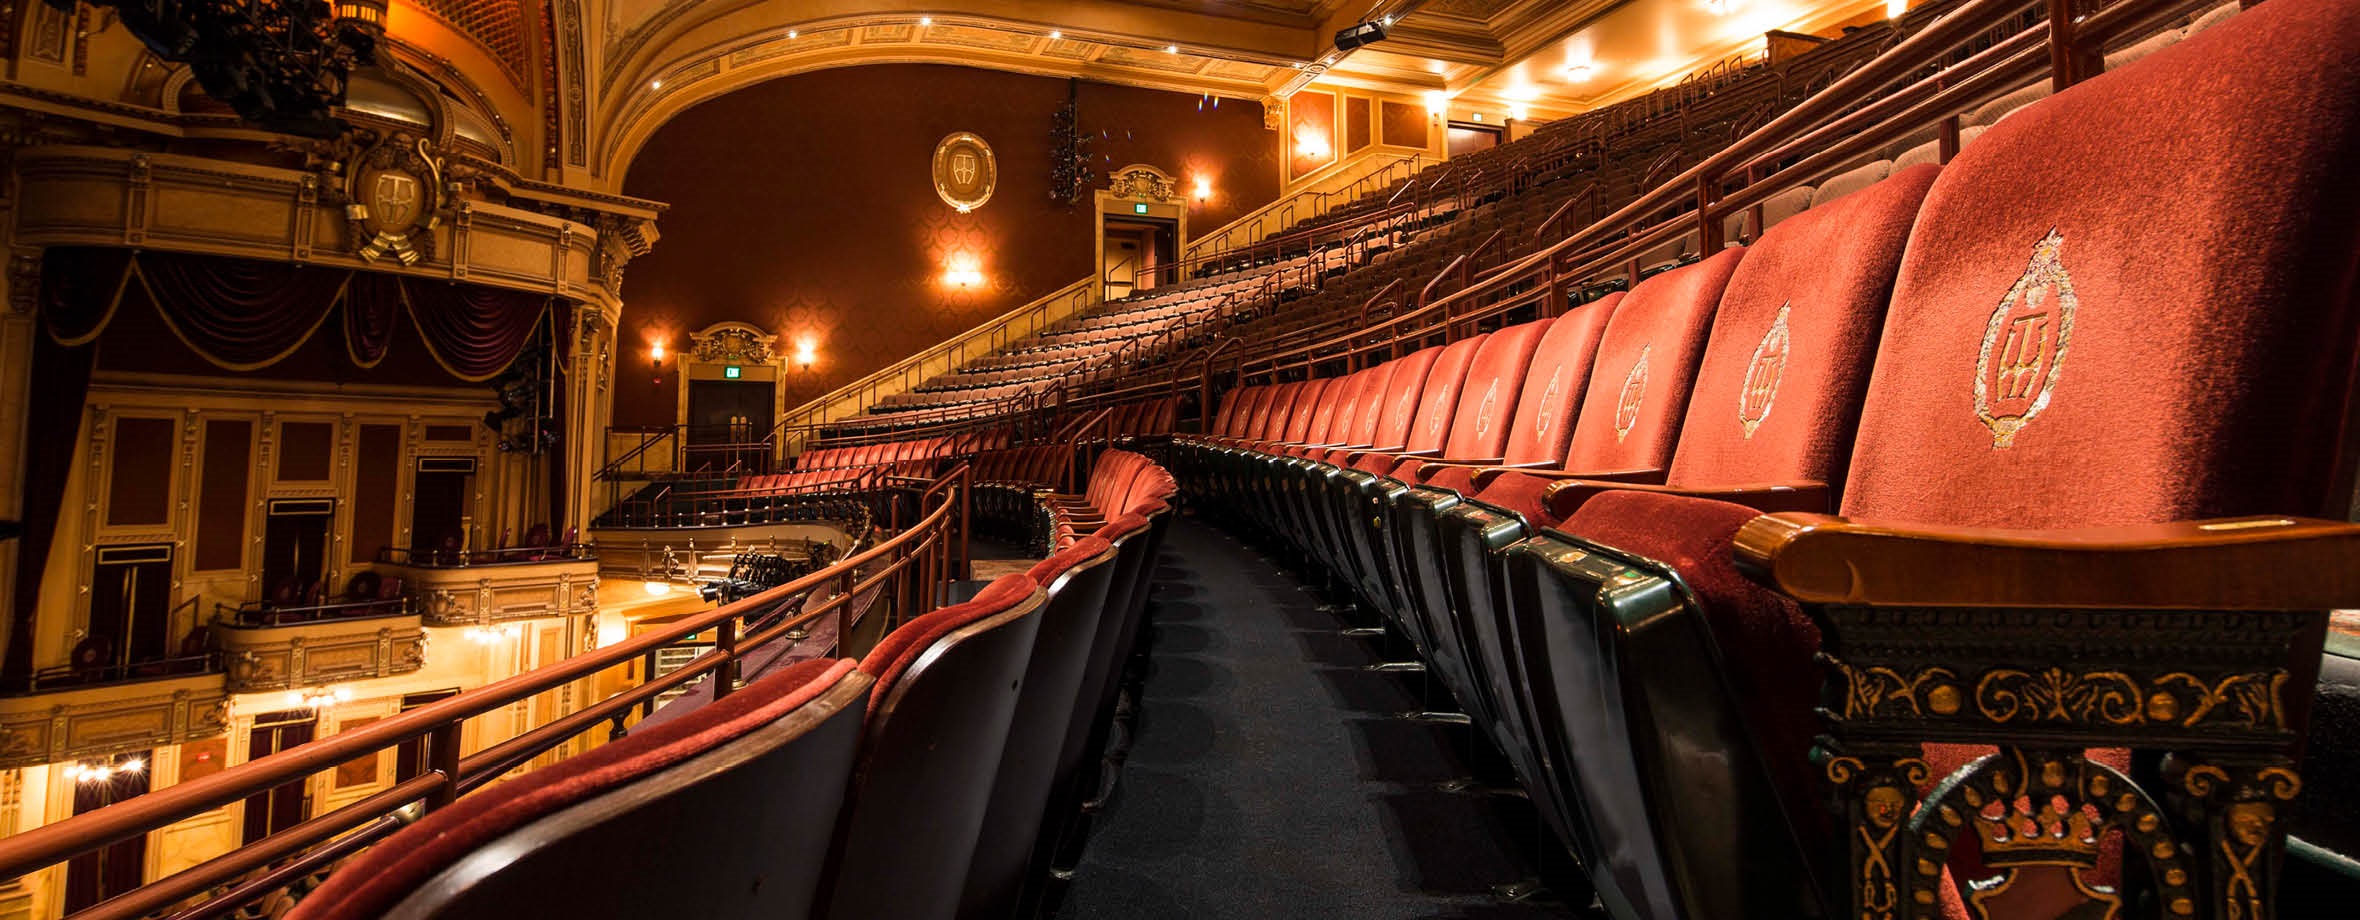 Hippordrome Theater in Baltimore